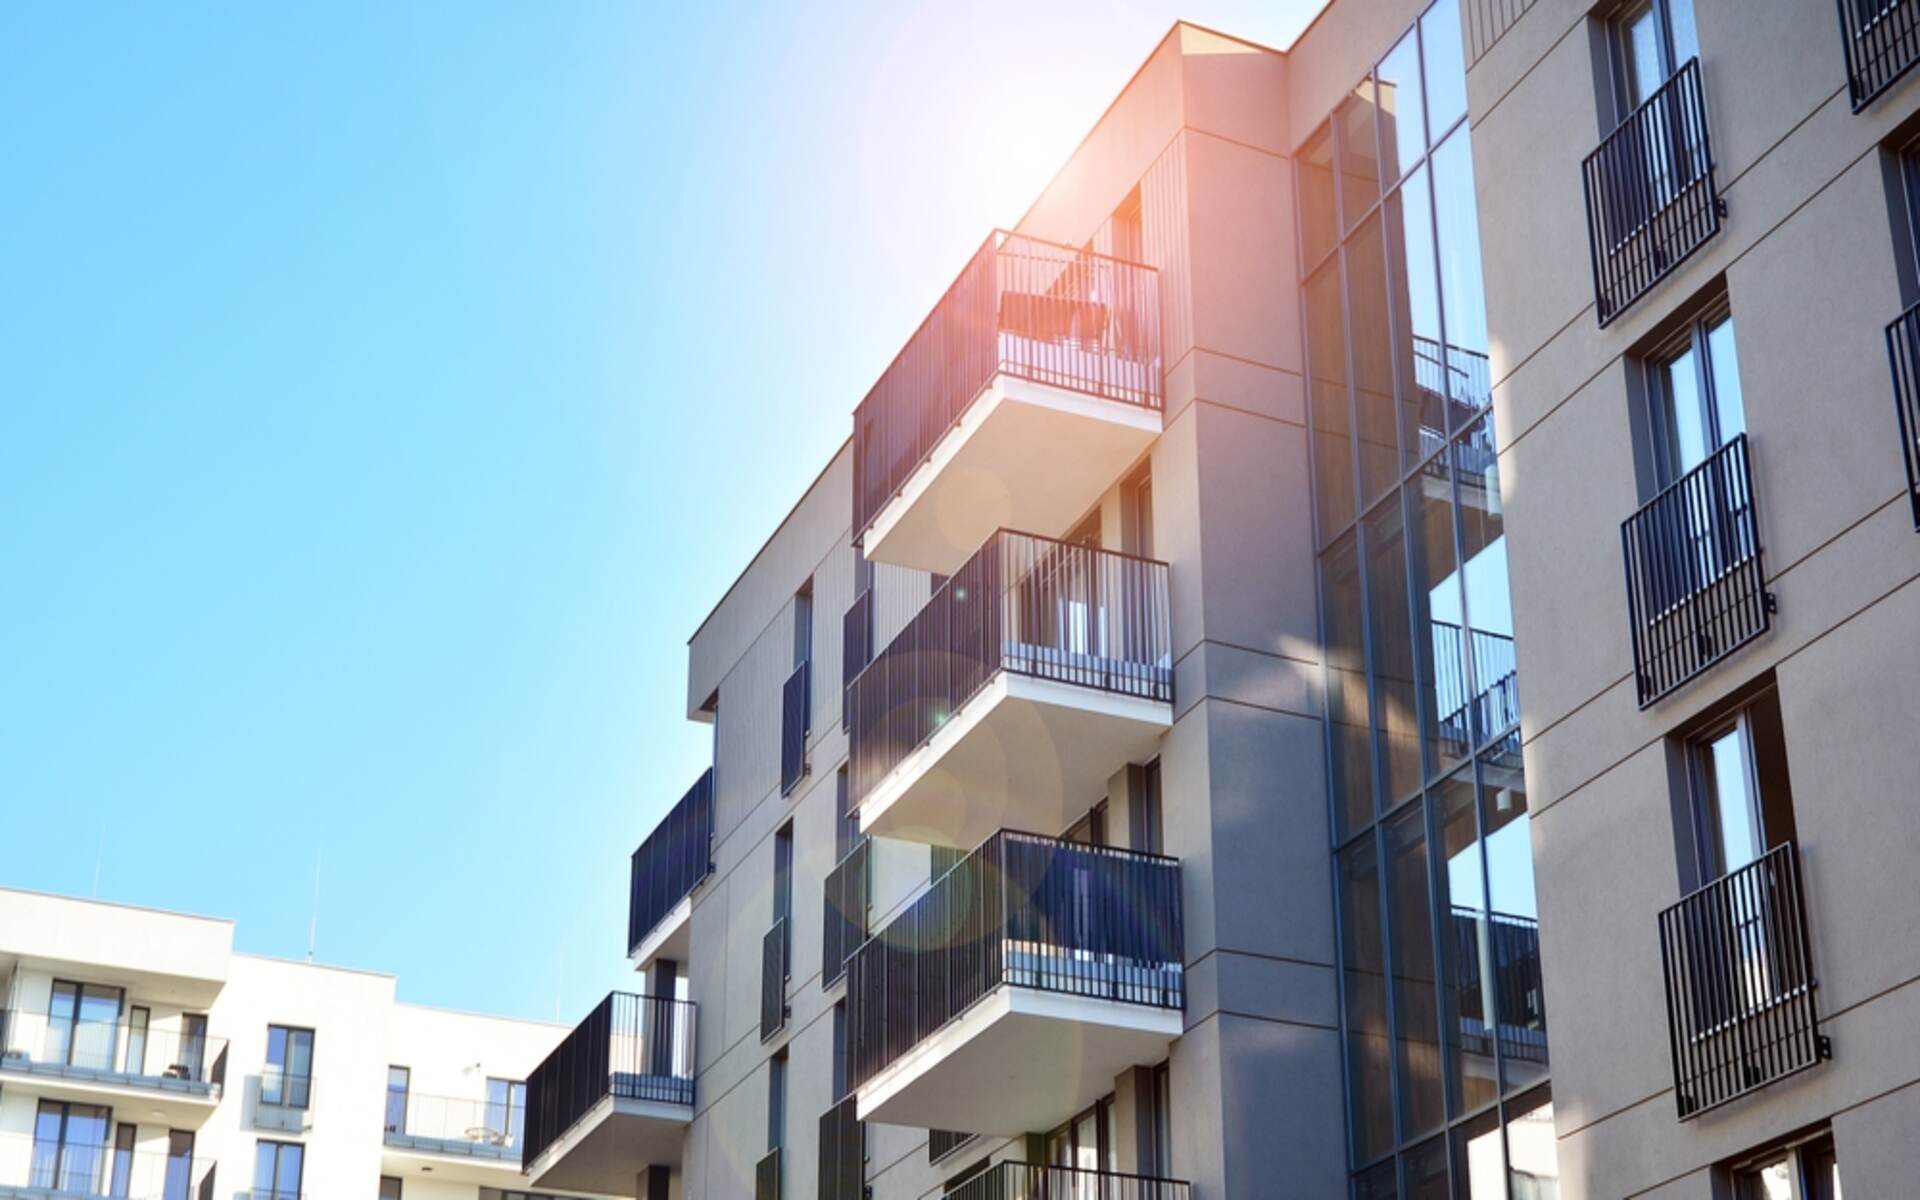 Sunlight illuminates the modern exterior of a multifamily apartment building, highlighting the balconies and windows, ideal for showcasing property management supplies.